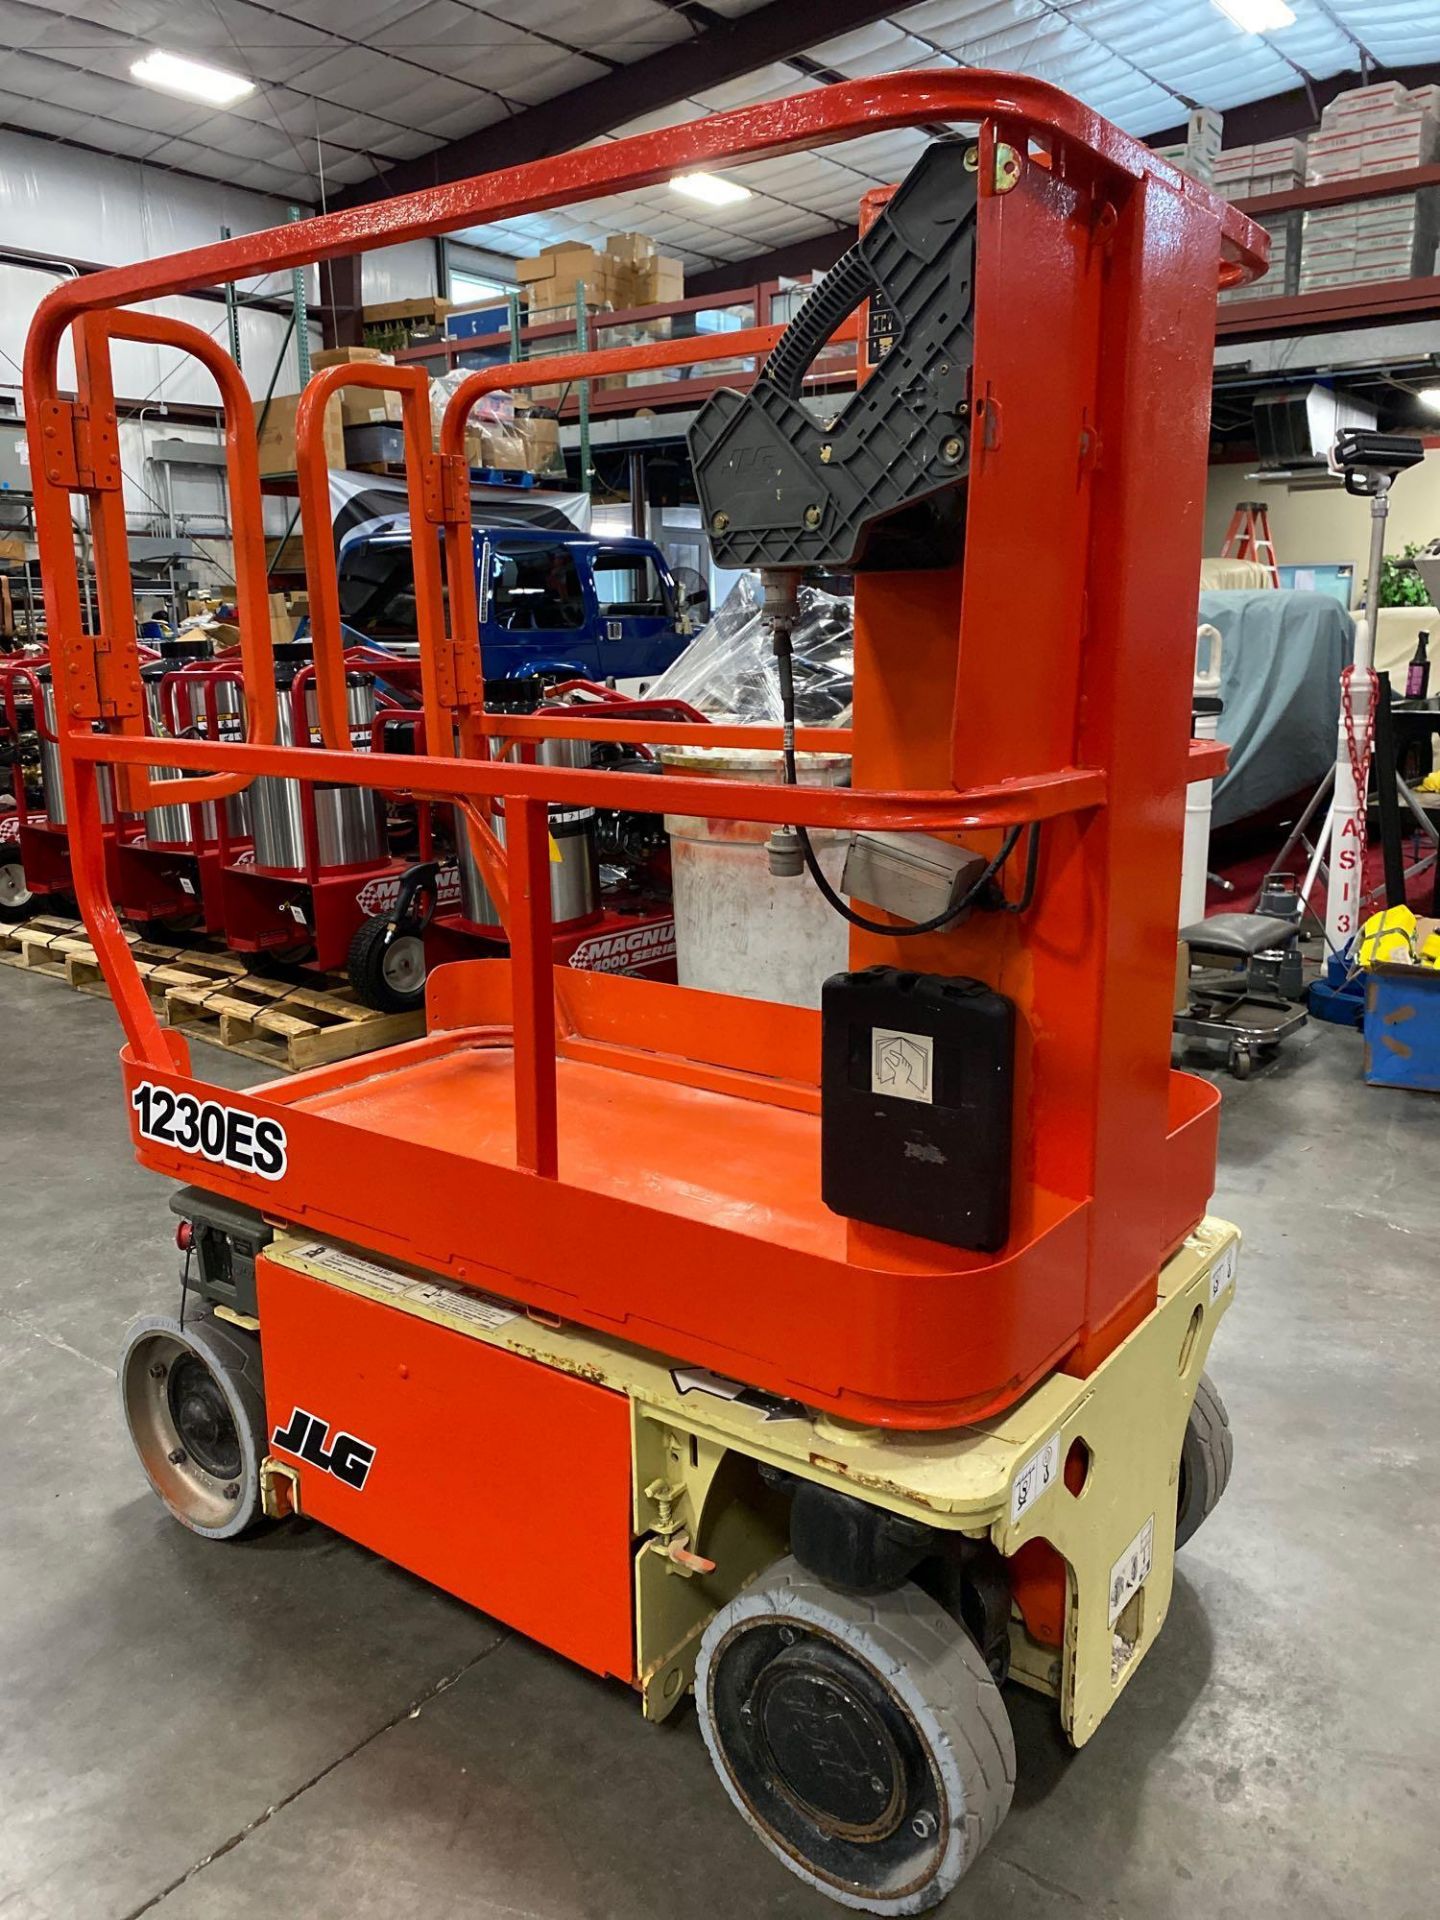 JLG 1230ES SCISSOR LIFT, 12' MAX PLATFORM HEIGHT, BUILT IN BATTERY CHARGER, NON MARKING TIRES, RUNS - Image 2 of 6